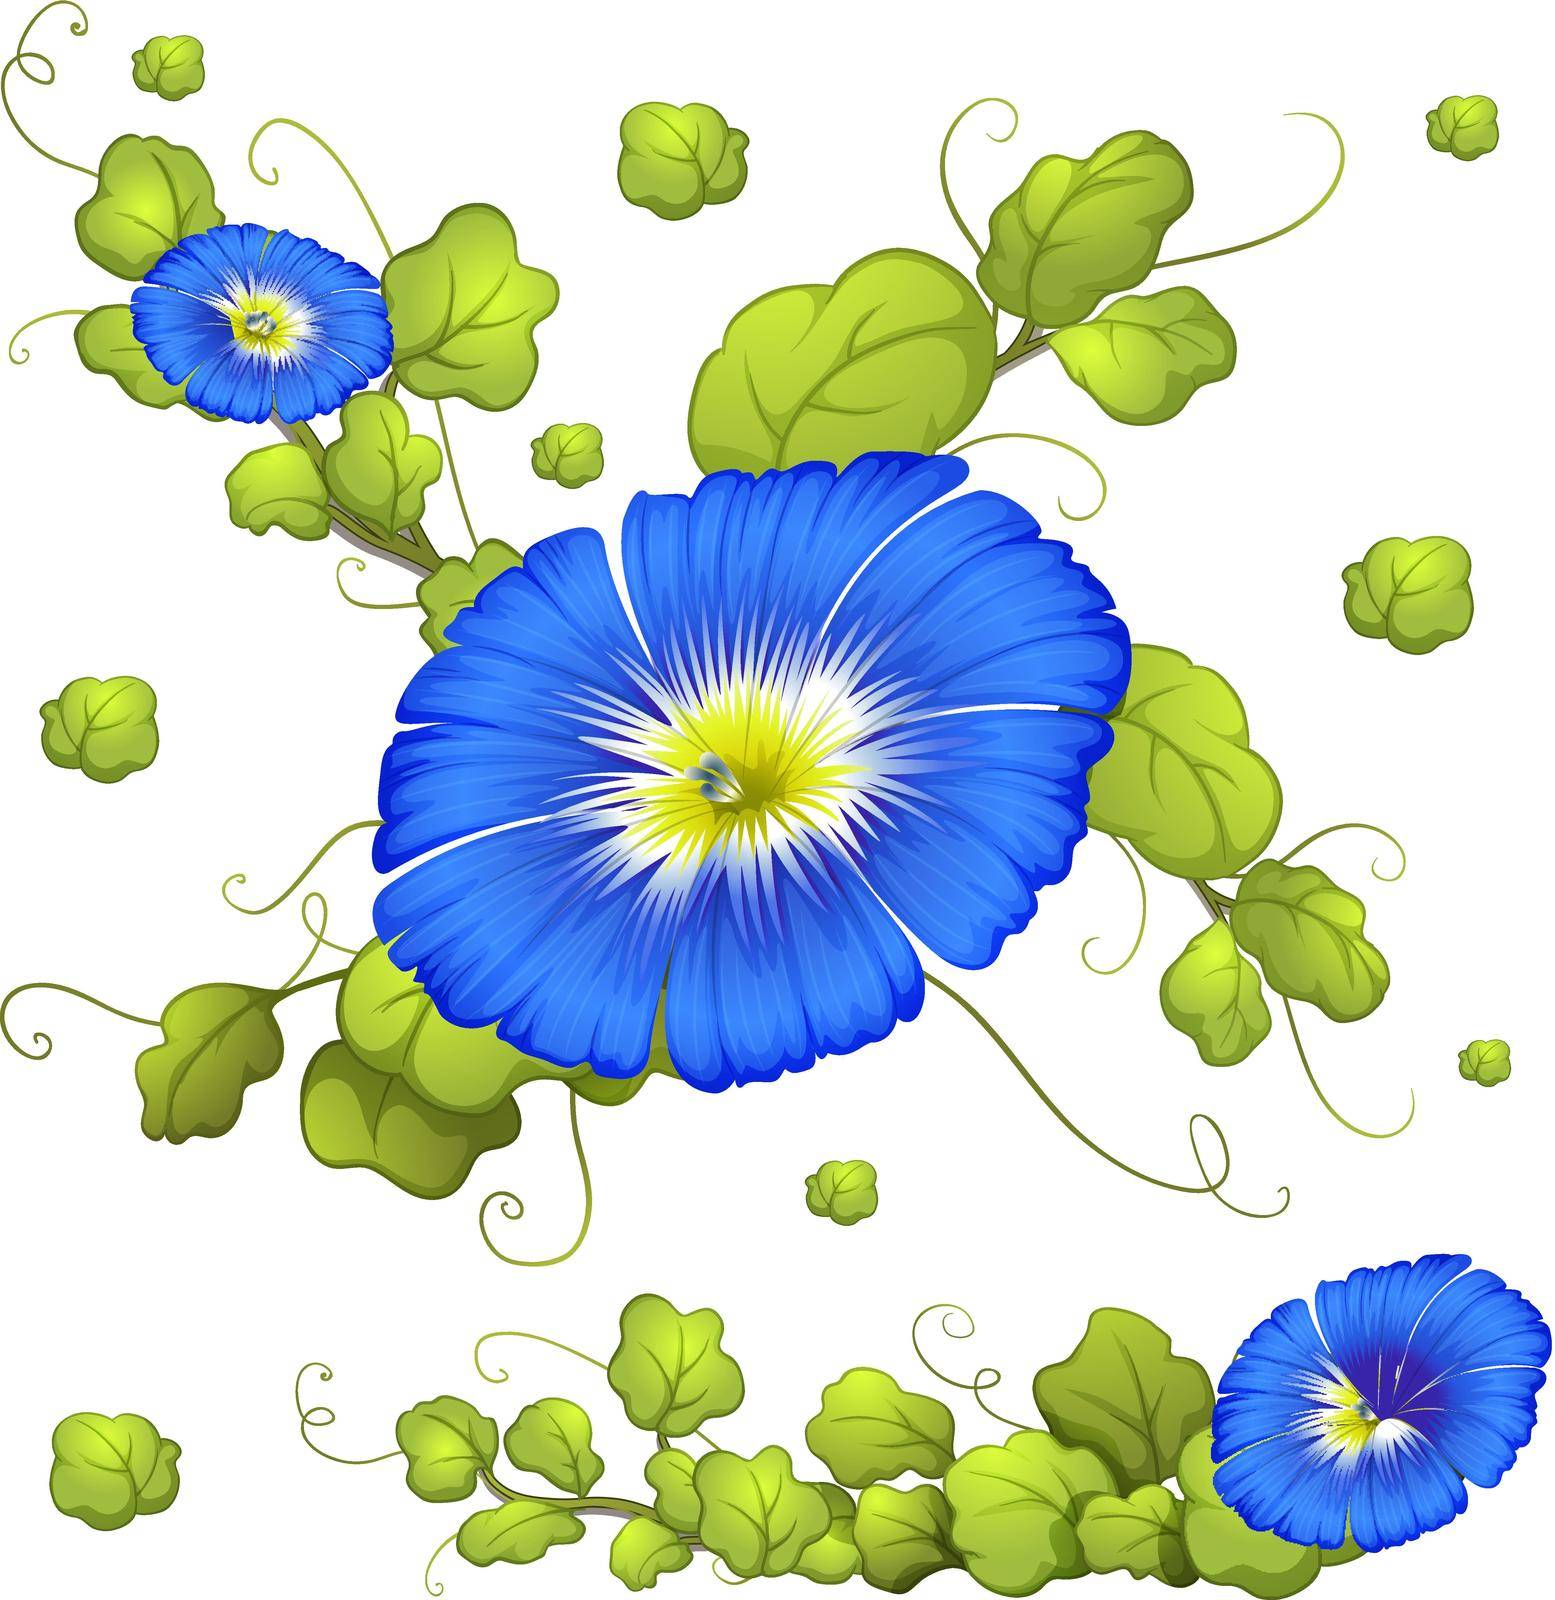 Seamless background with blue morning glory flowers illustration